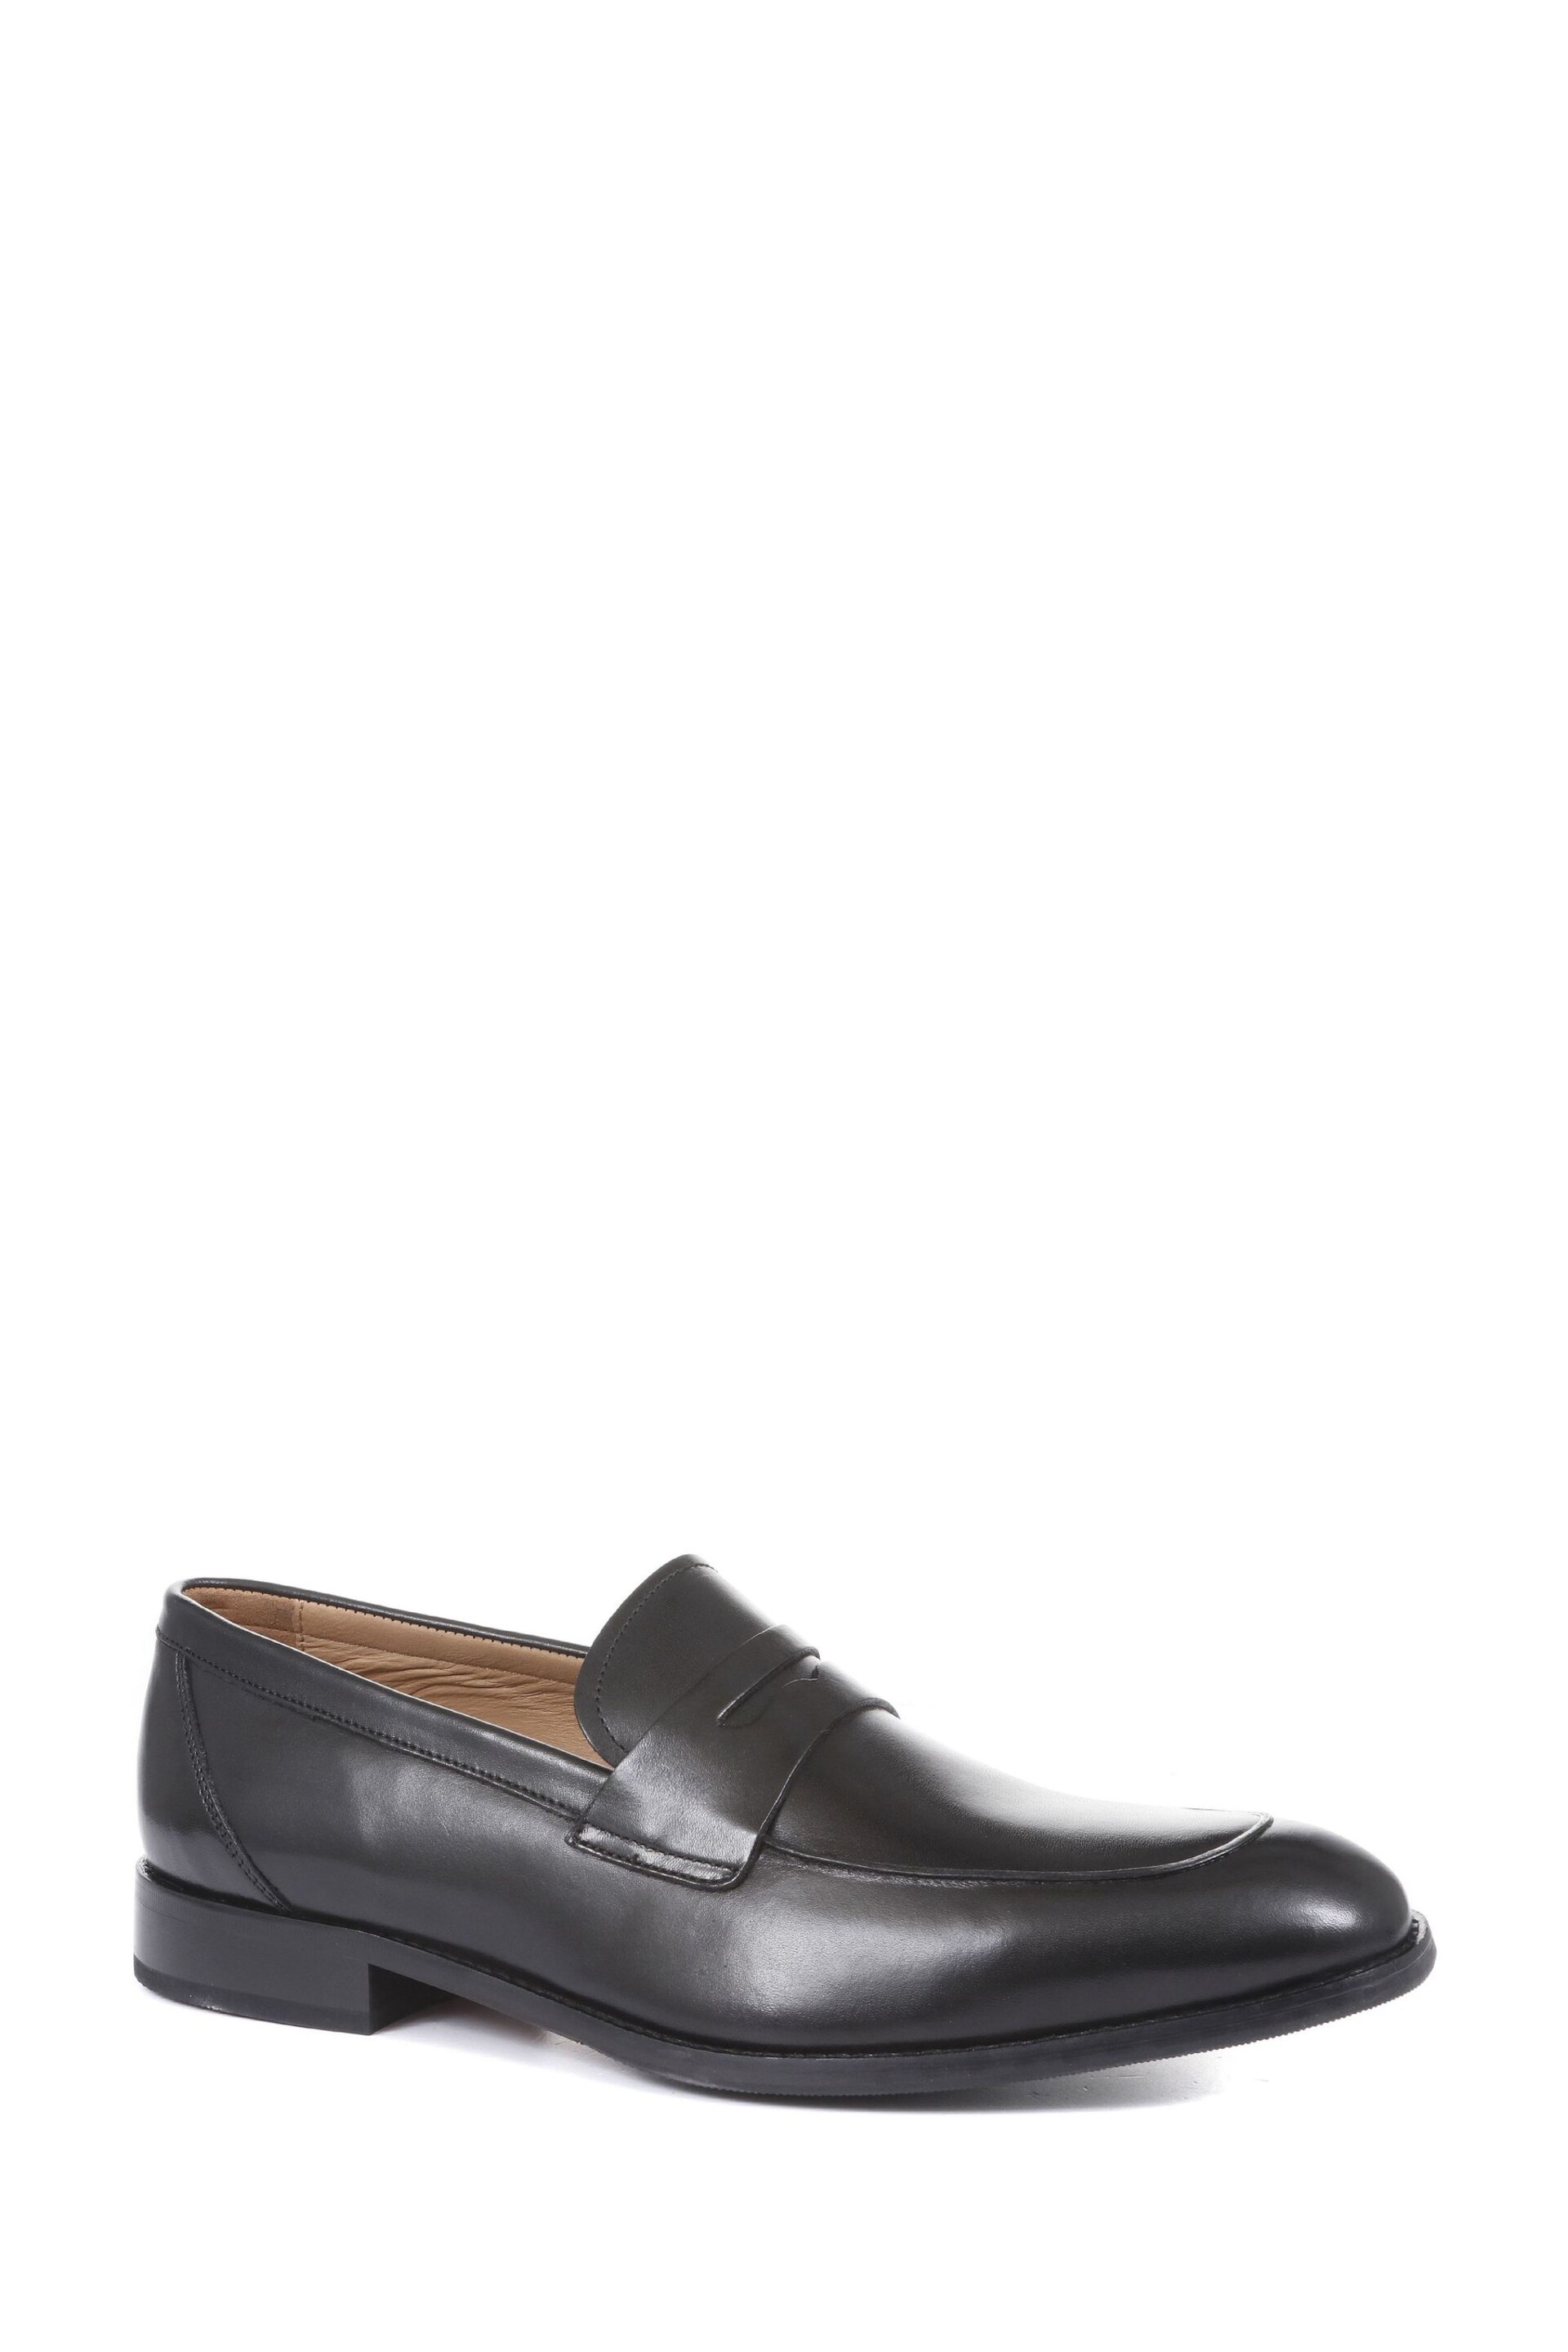 Jones Bootmaker Leather Penny Loafers - Image 3 of 6